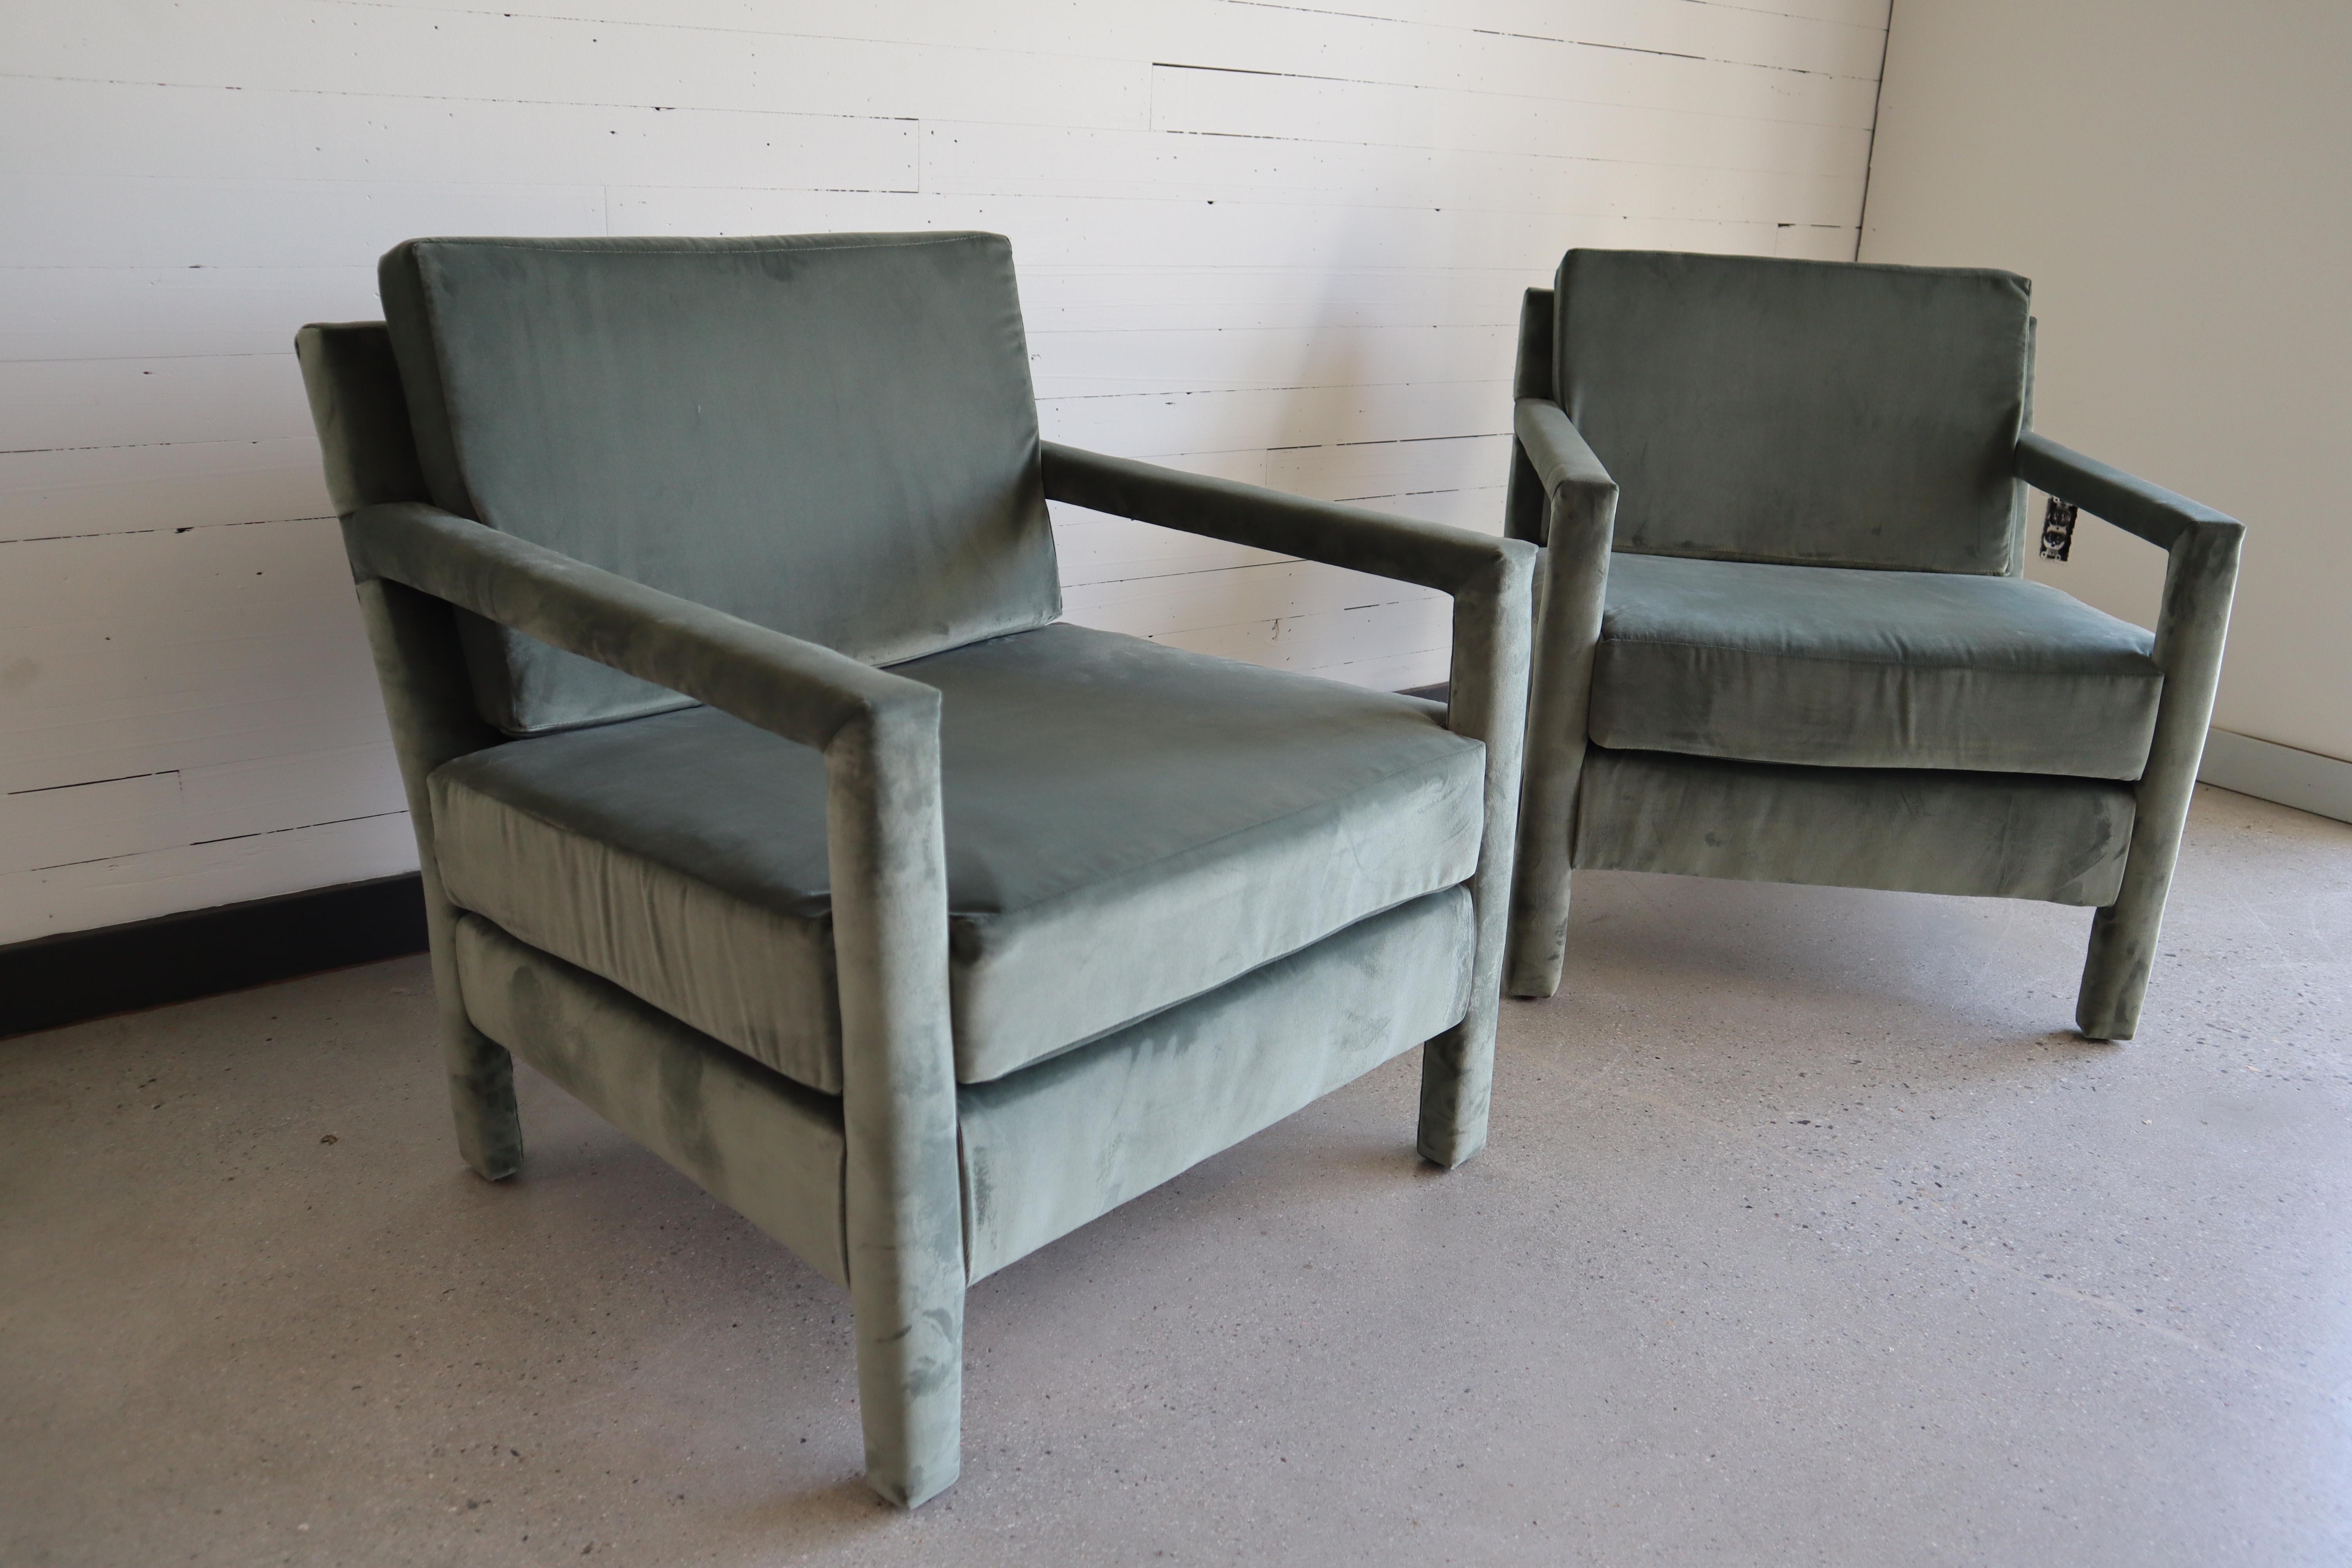 Set of Parsons Chairs in the style of Milo Baughman
Newly upholstered in sage green luxury velvet
In excellent condition.